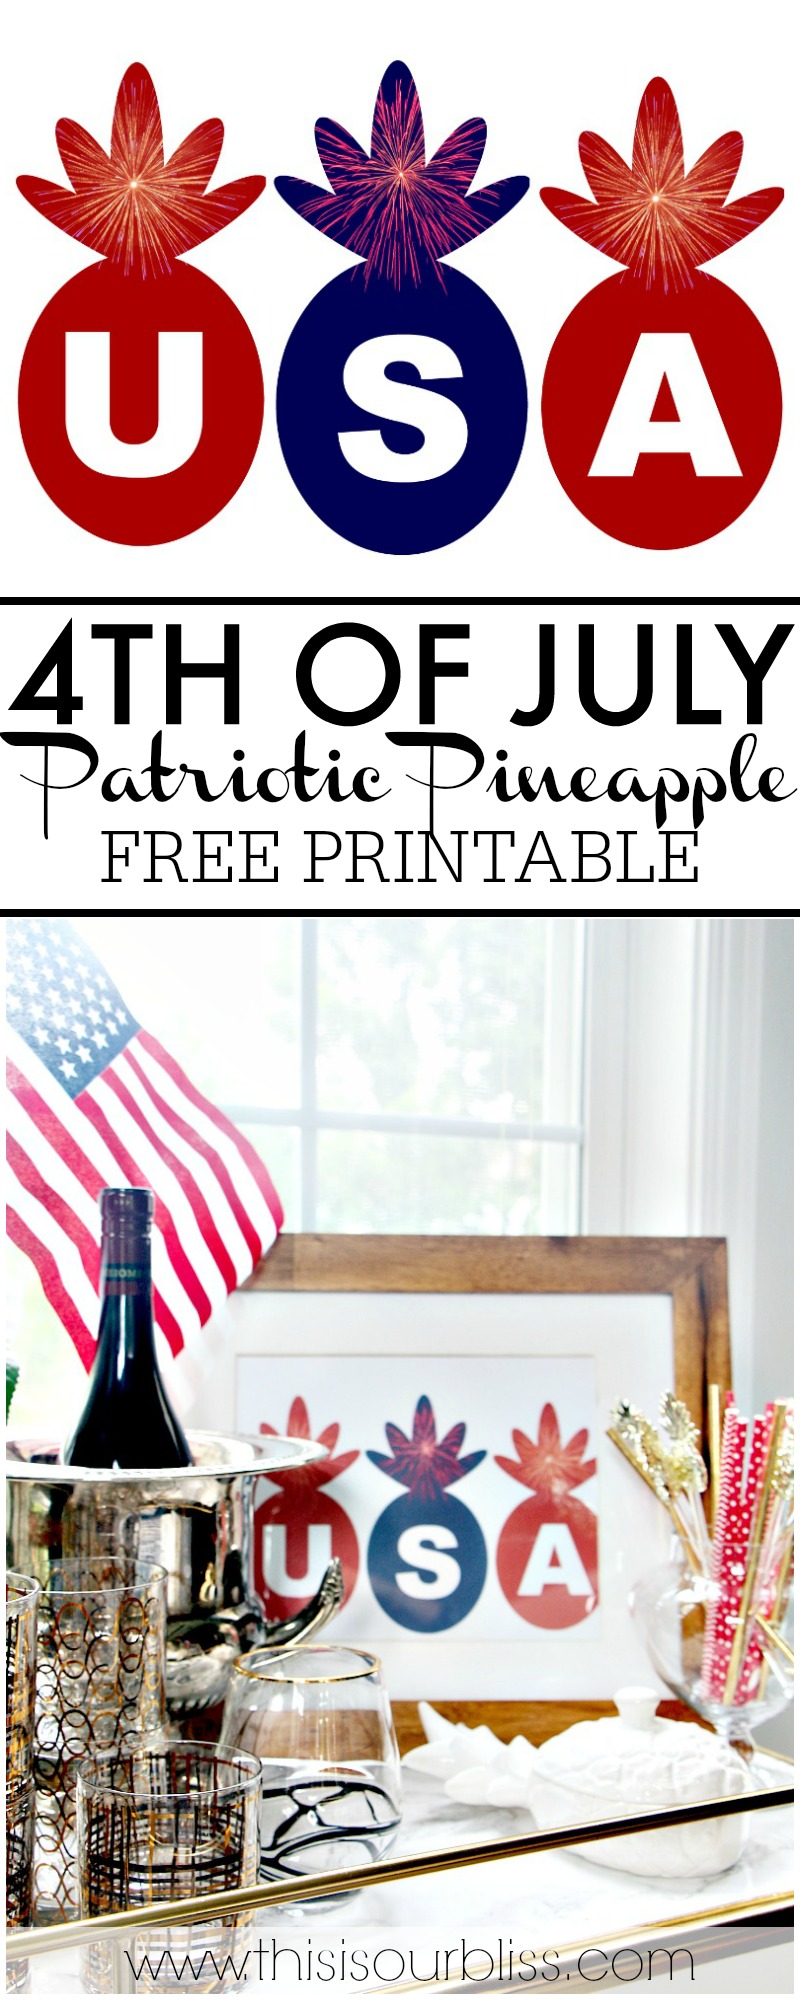 Free Patriotic Pineapple Printable | 4th of July Entertaining | 4 Days of Festive & Frugal 4th of July Ideas | www.thisisourbliss.com